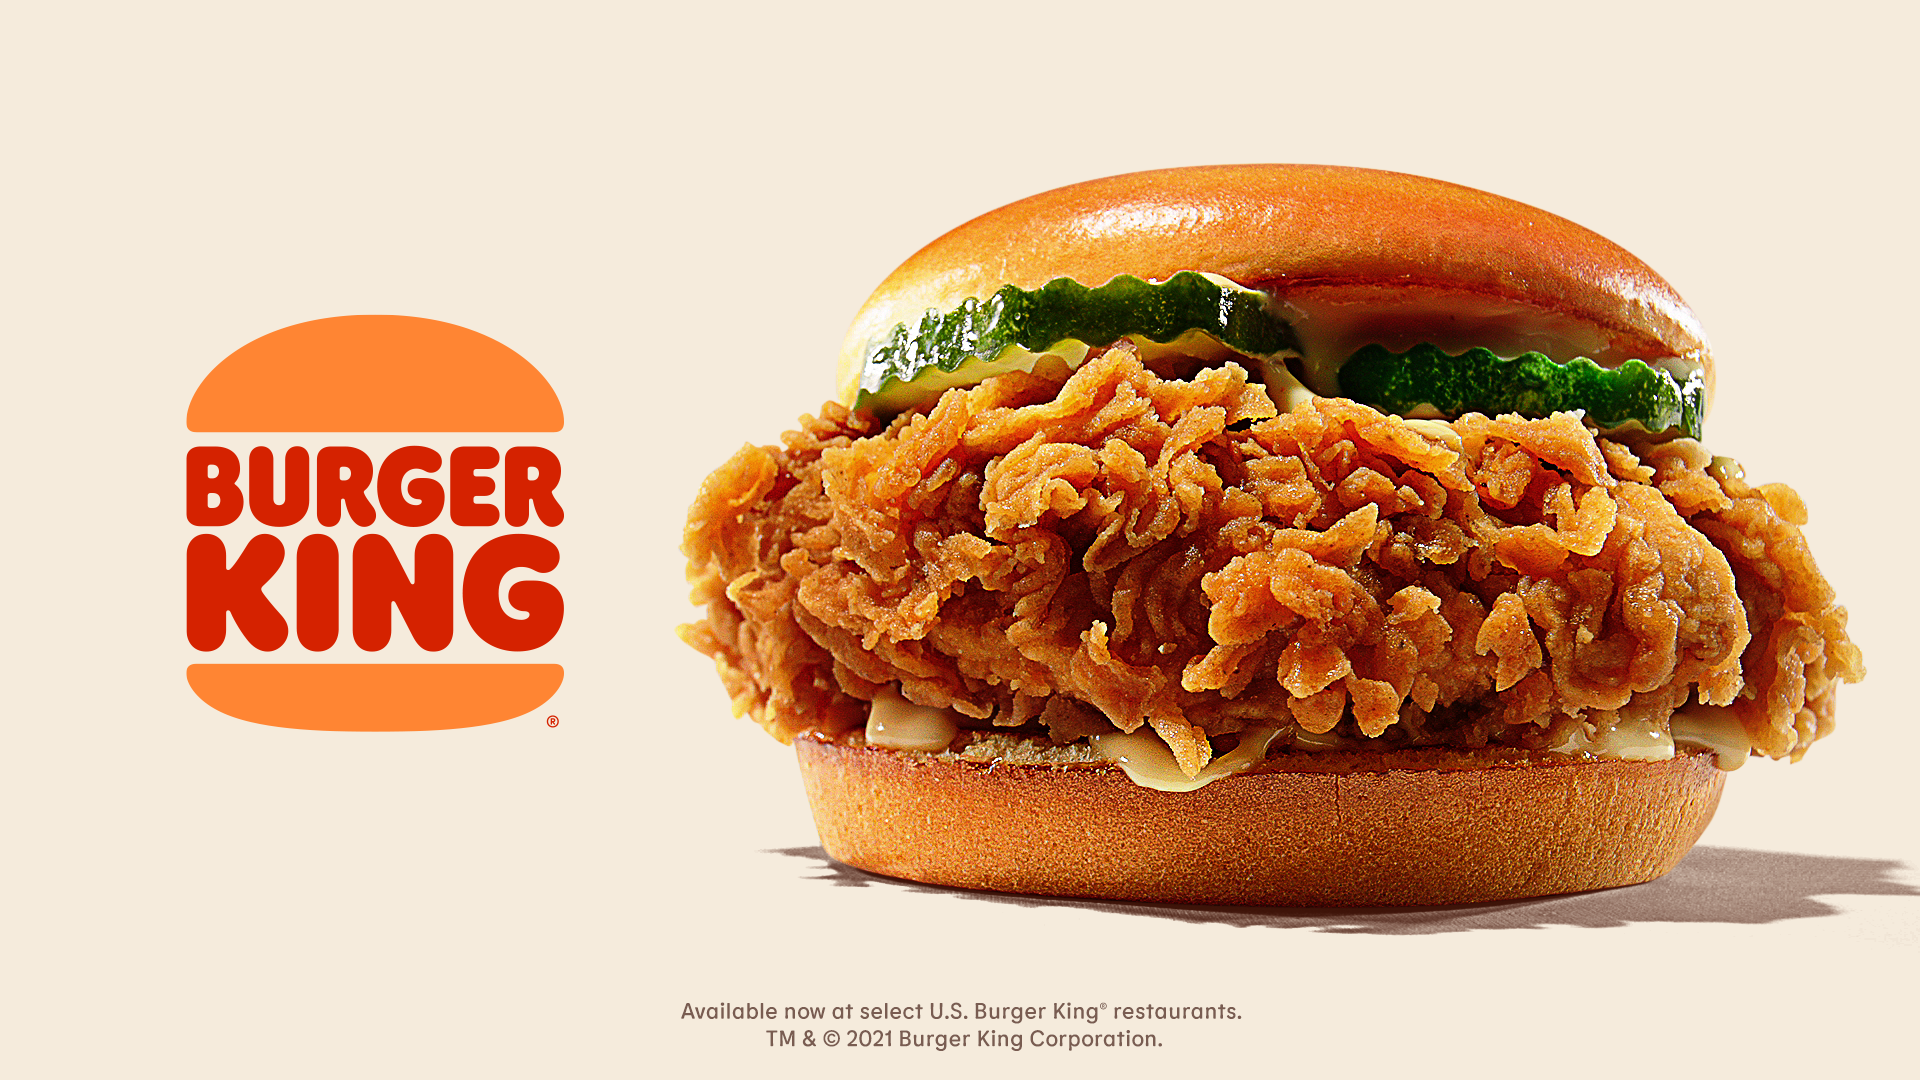 Burger King's chicken sandwich debut in Michigan delayed by pickle shortage, operator says